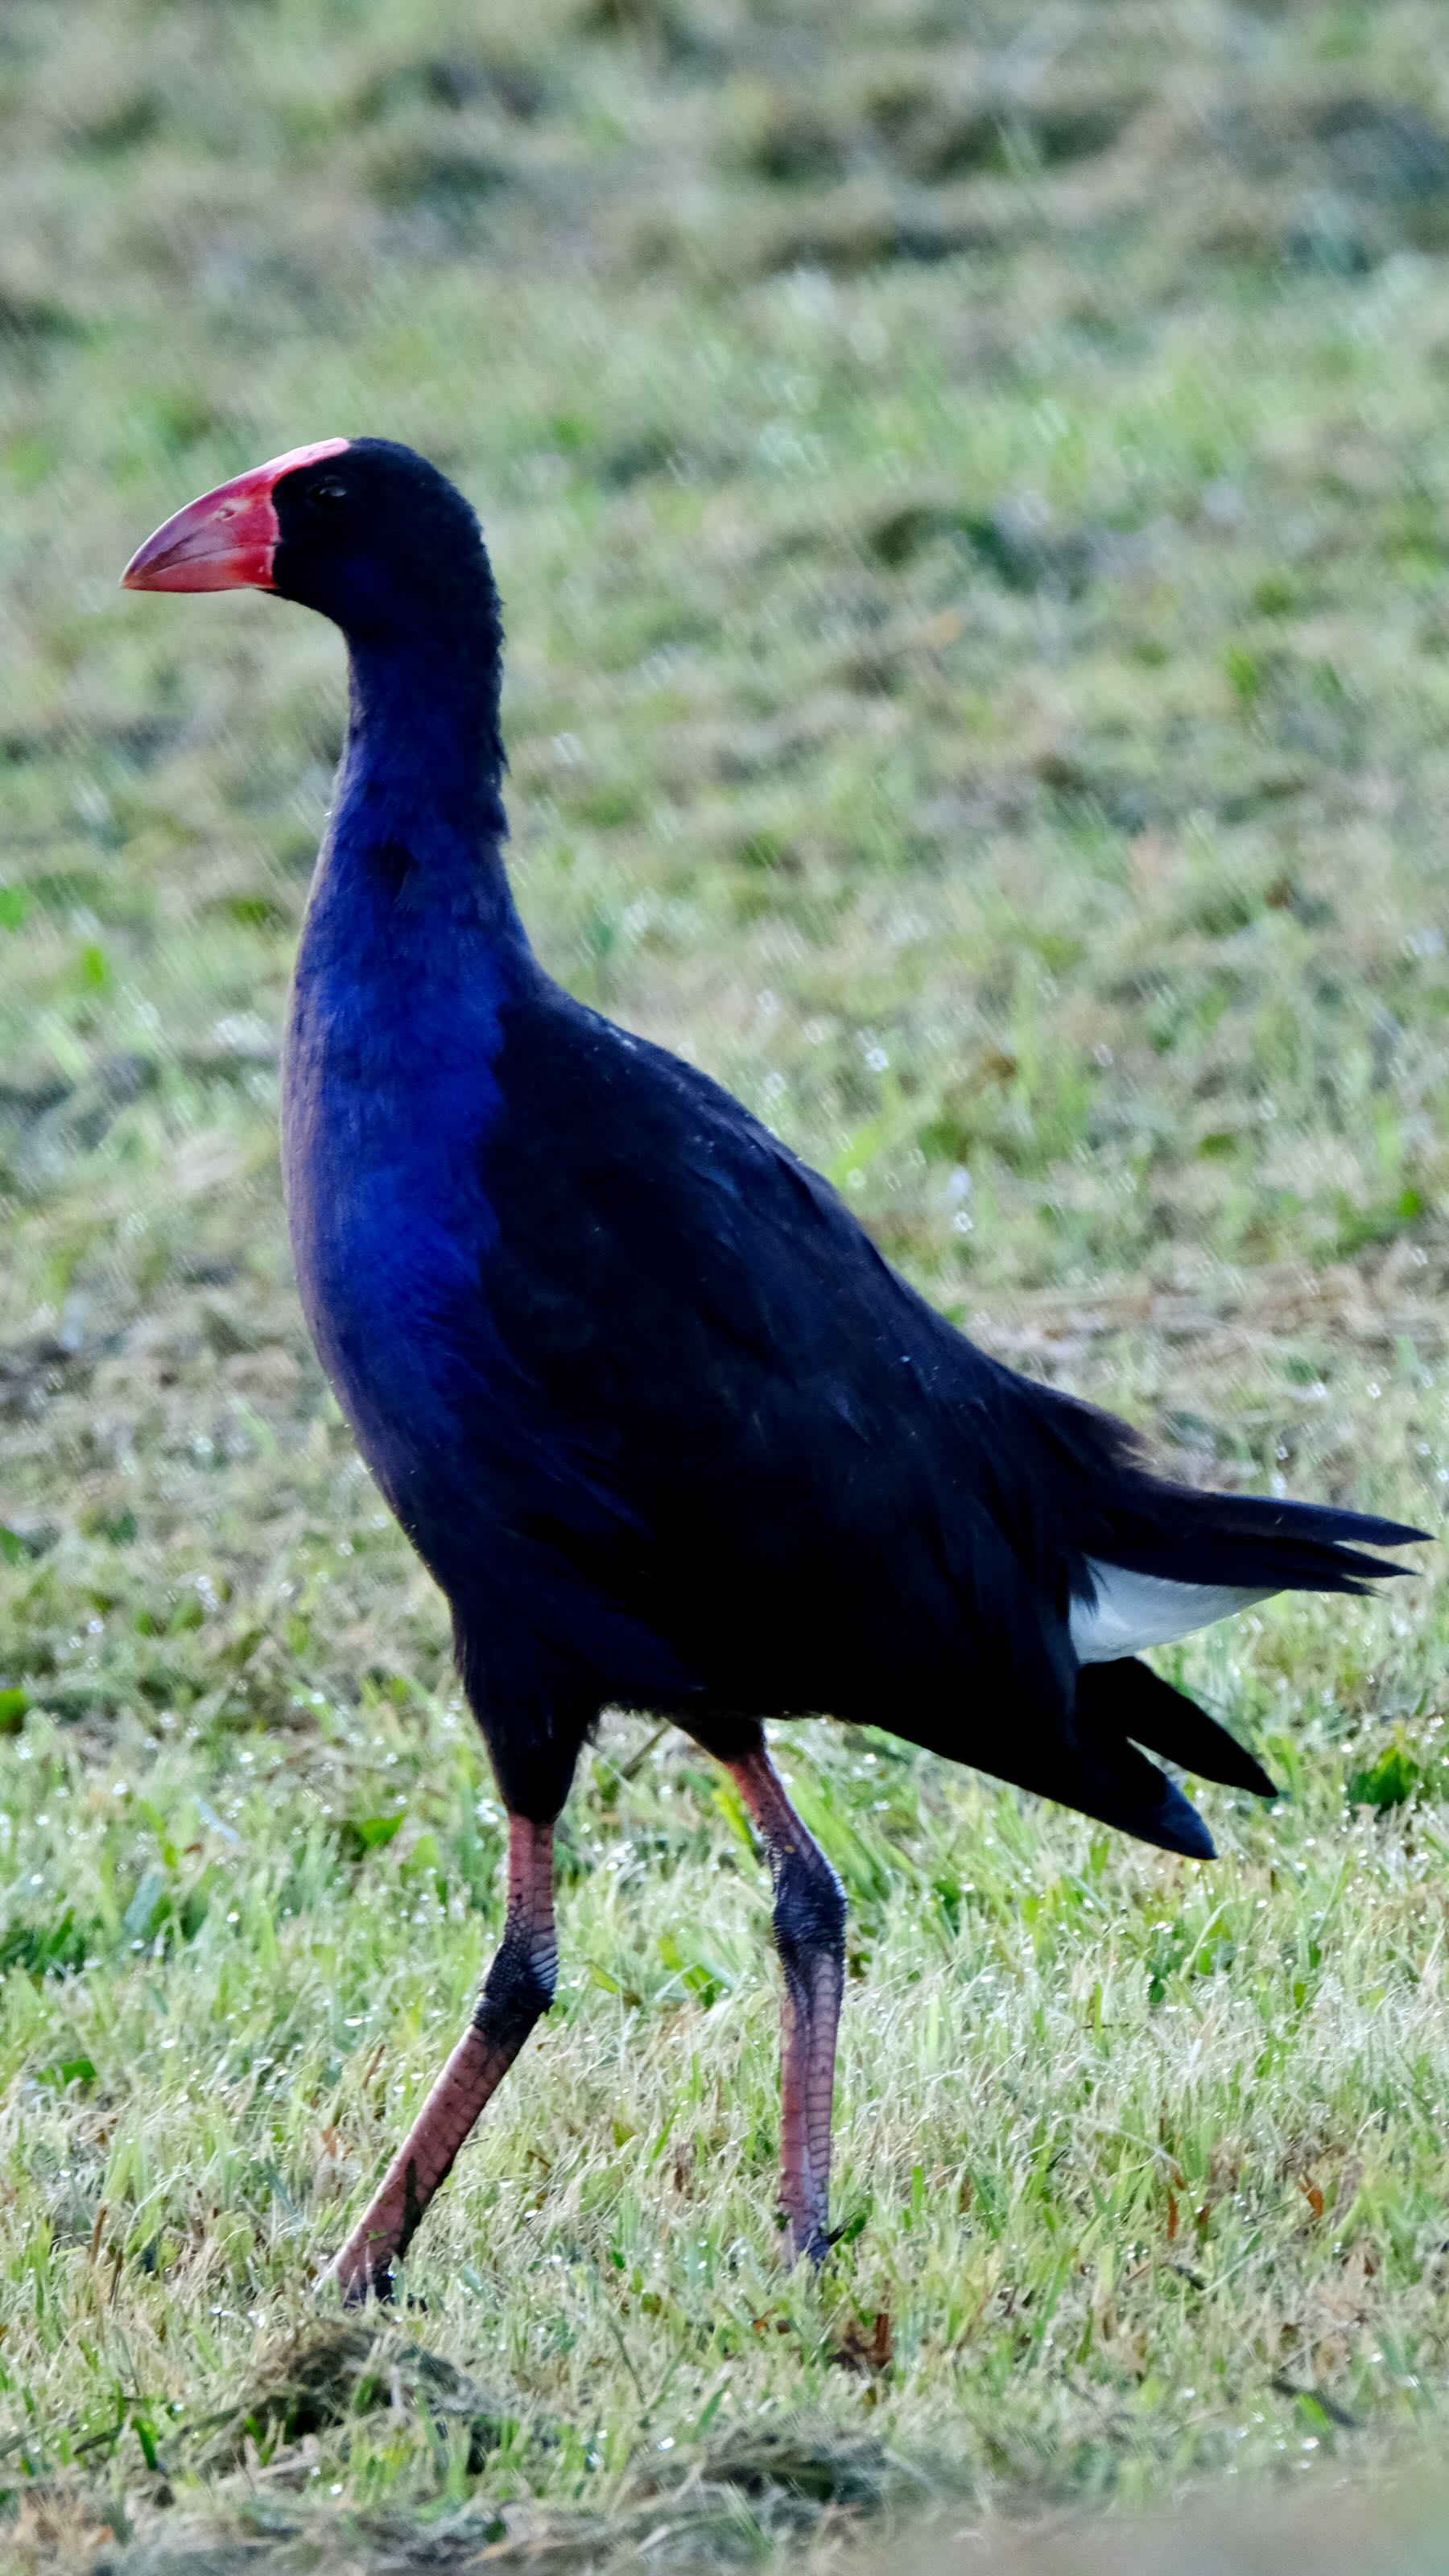 Large bird with vibrant blue body, black wings and red frontal shield standing on grass. 